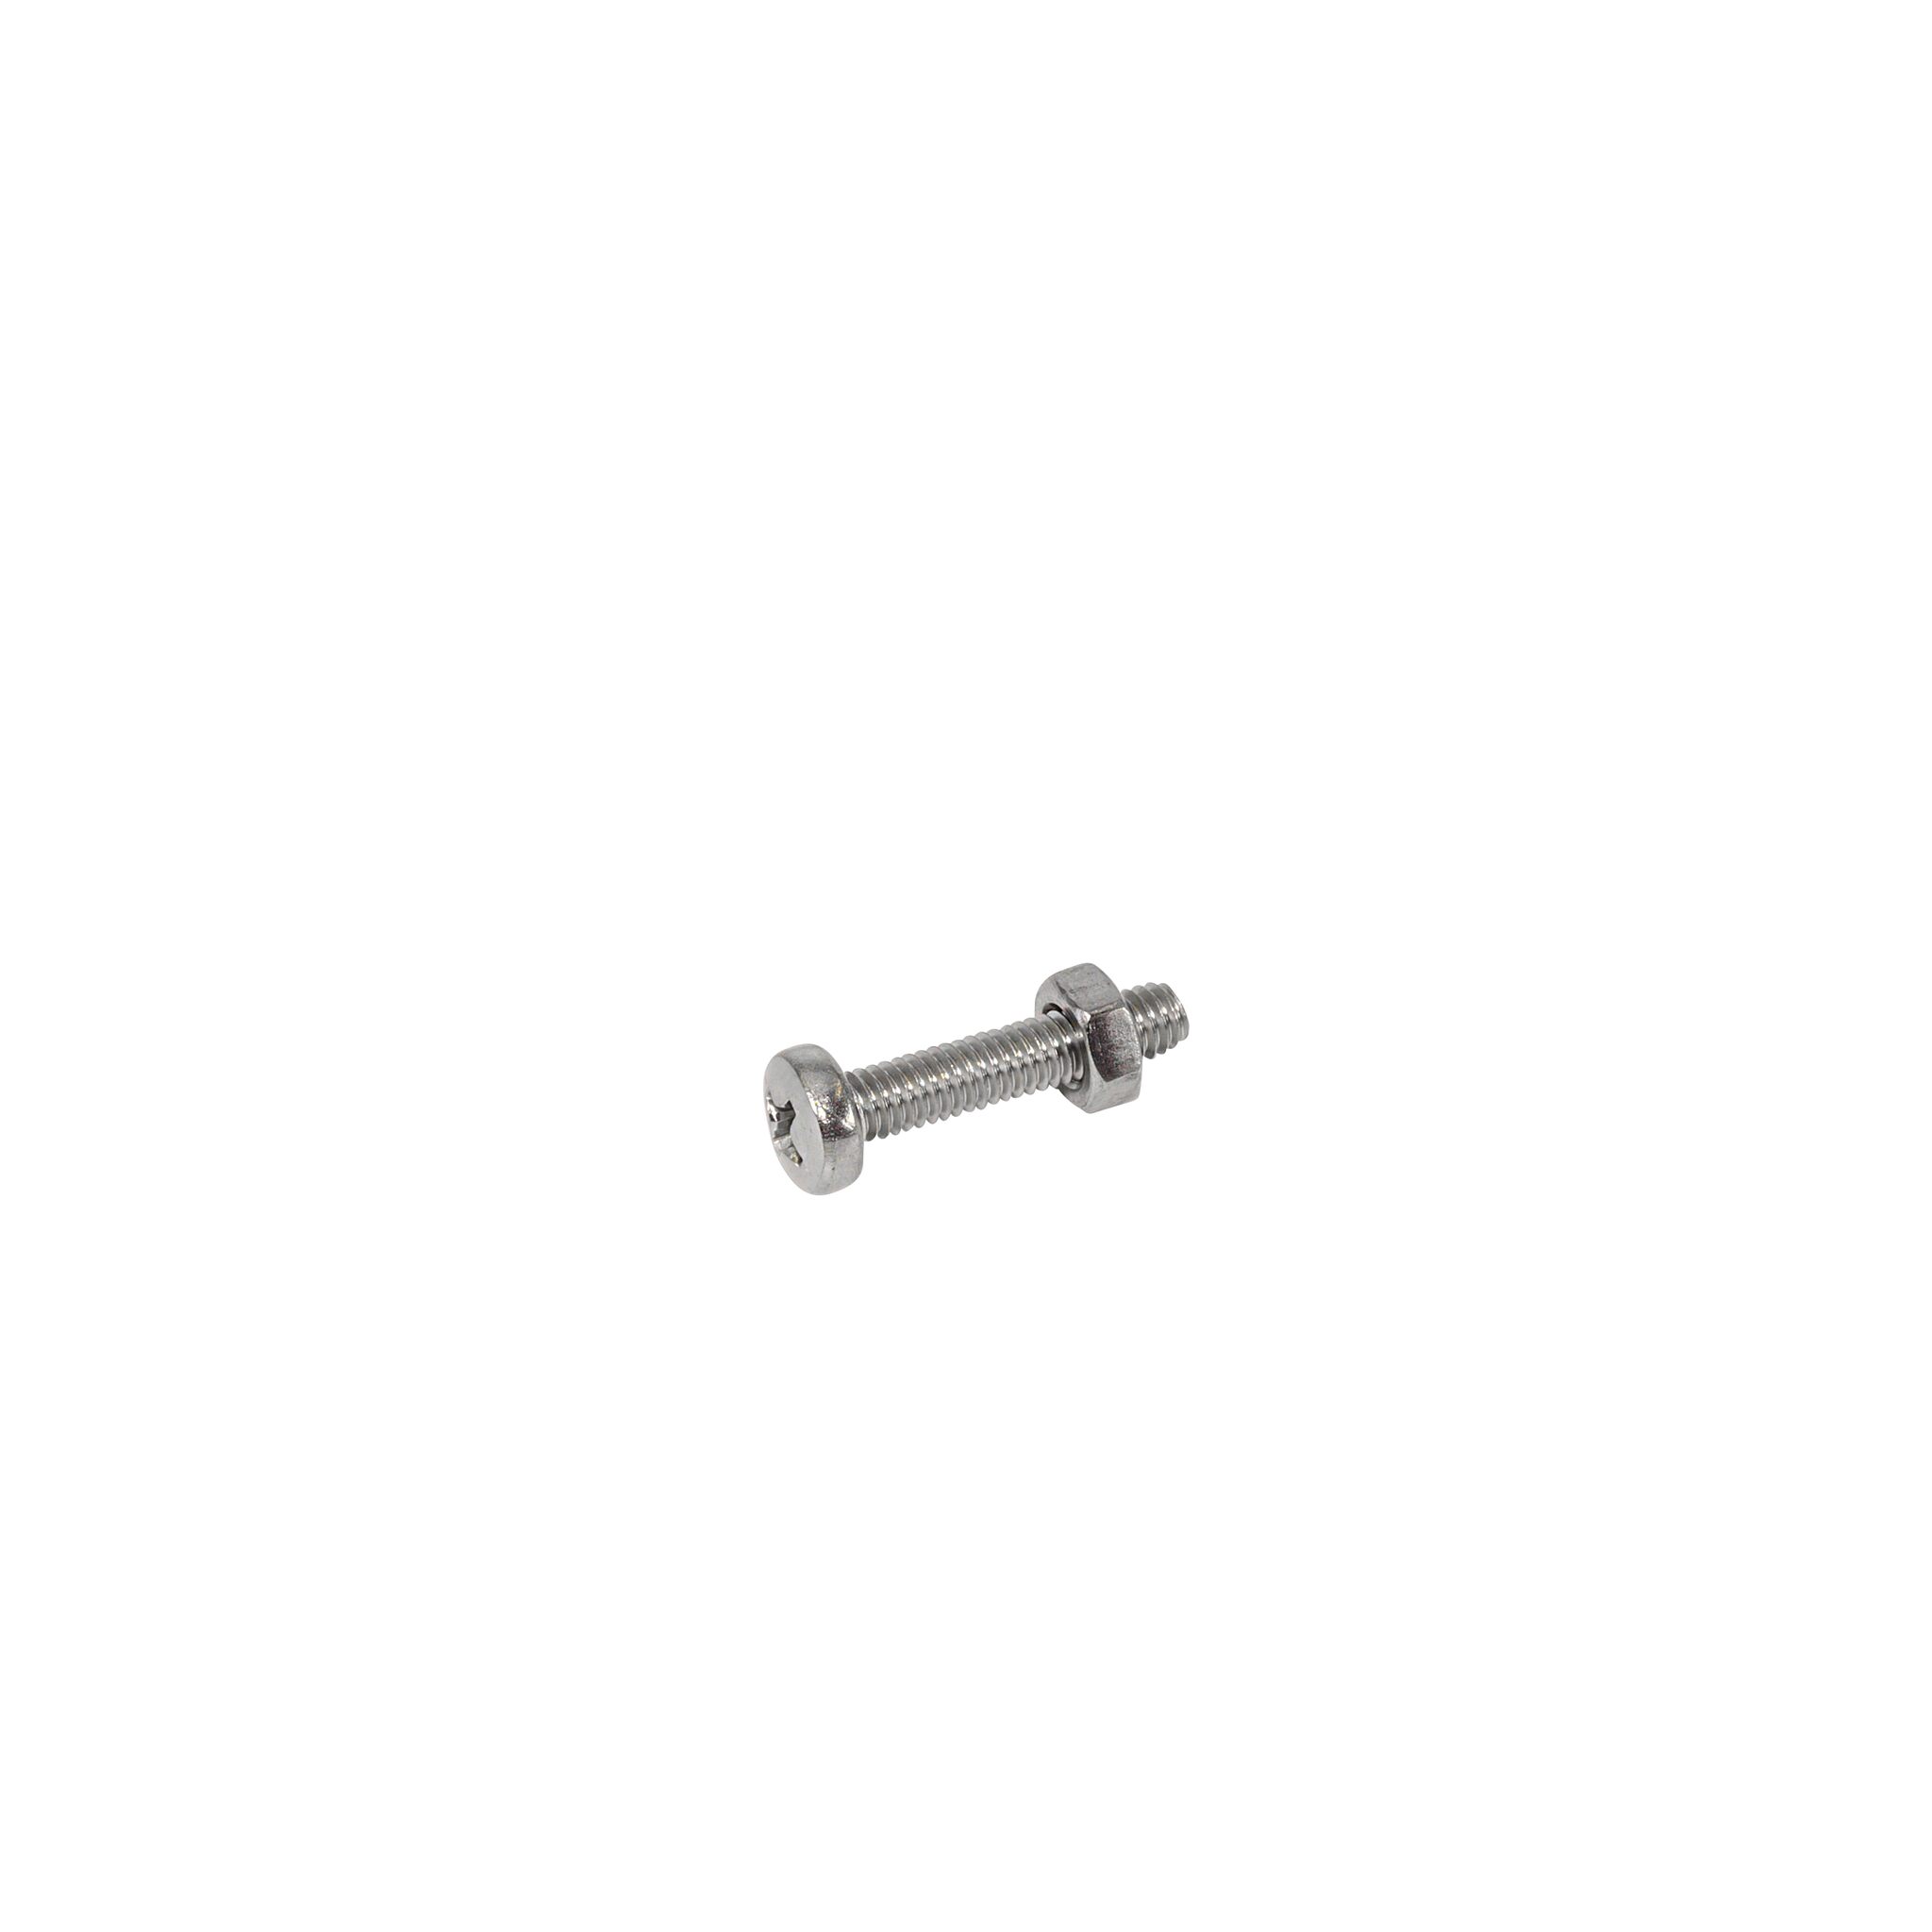 Pan head screw with nut (DIN 7985/934-A4)